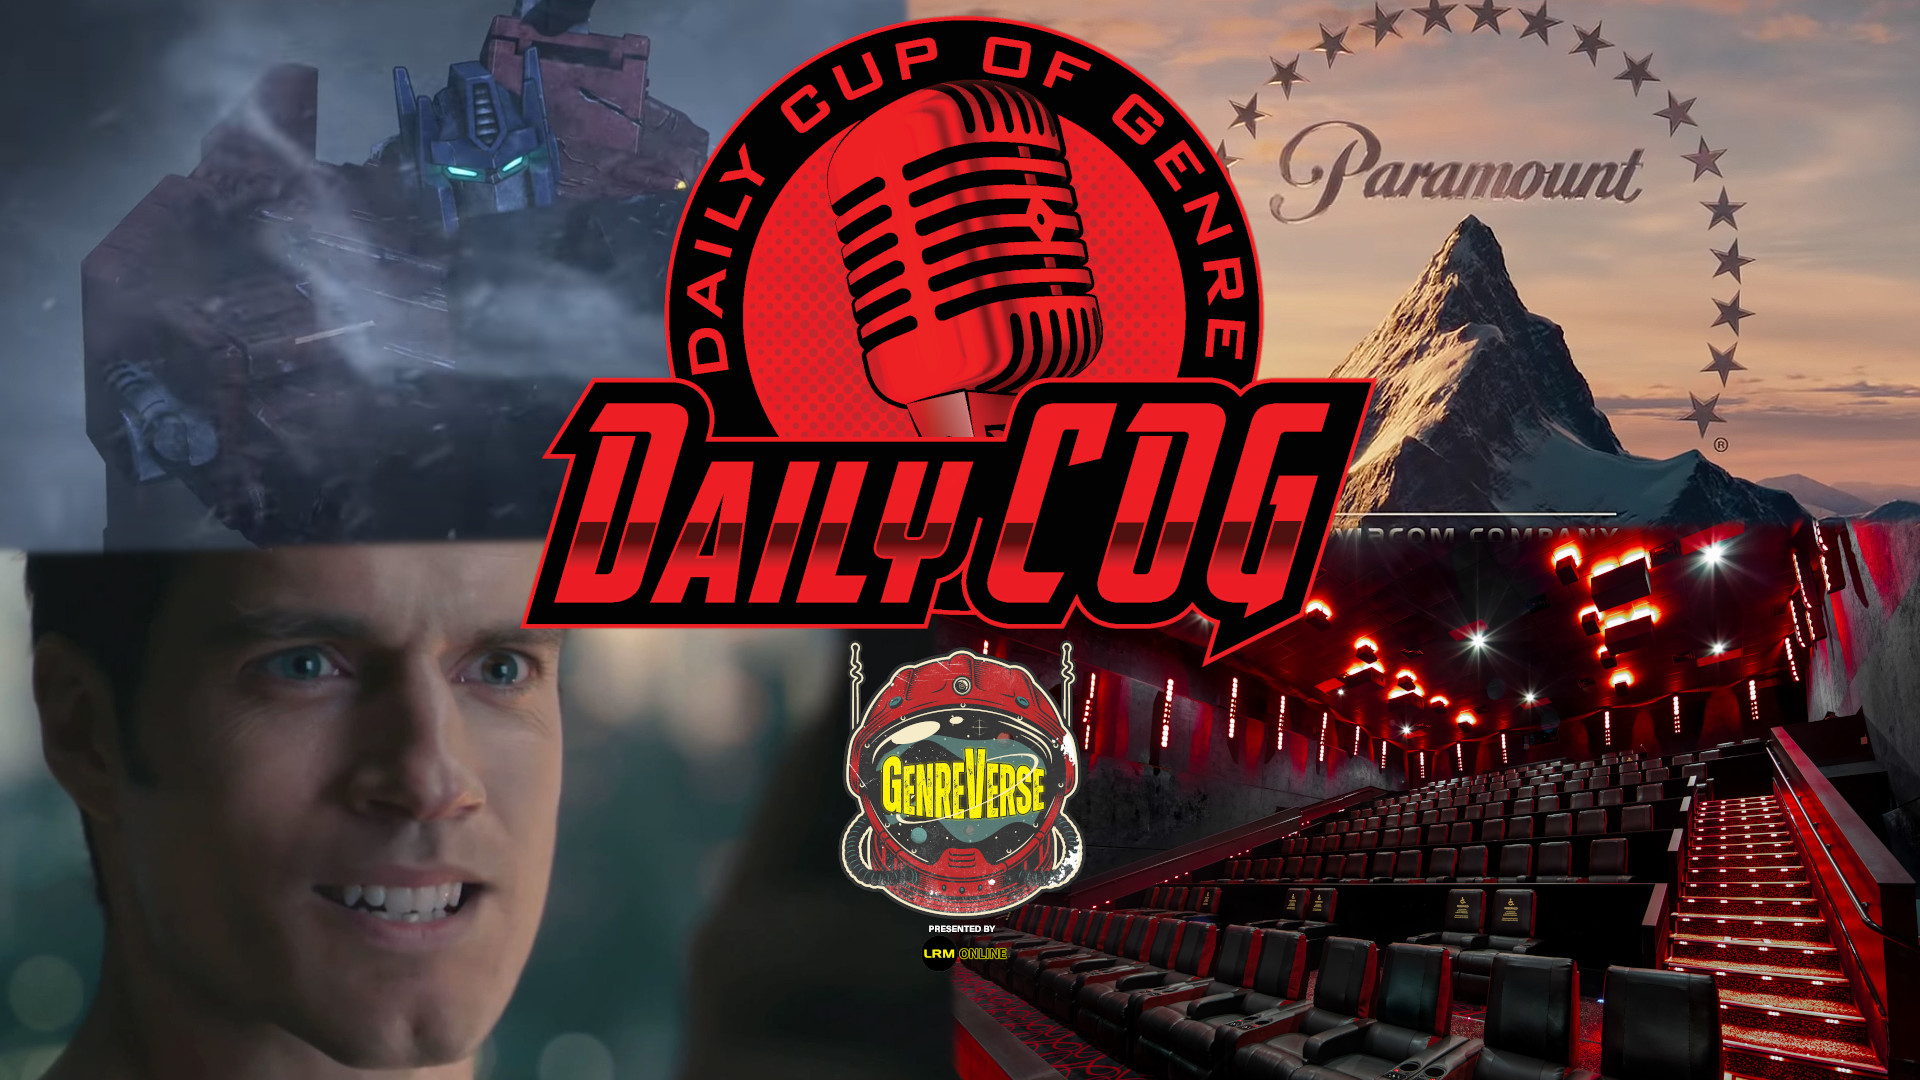 Weekend Box Office Numbers, Paramount Movie Dates, New Animated Transformers Movie, And Fixing Old And Bad CGI Daily COG Video Mix Down